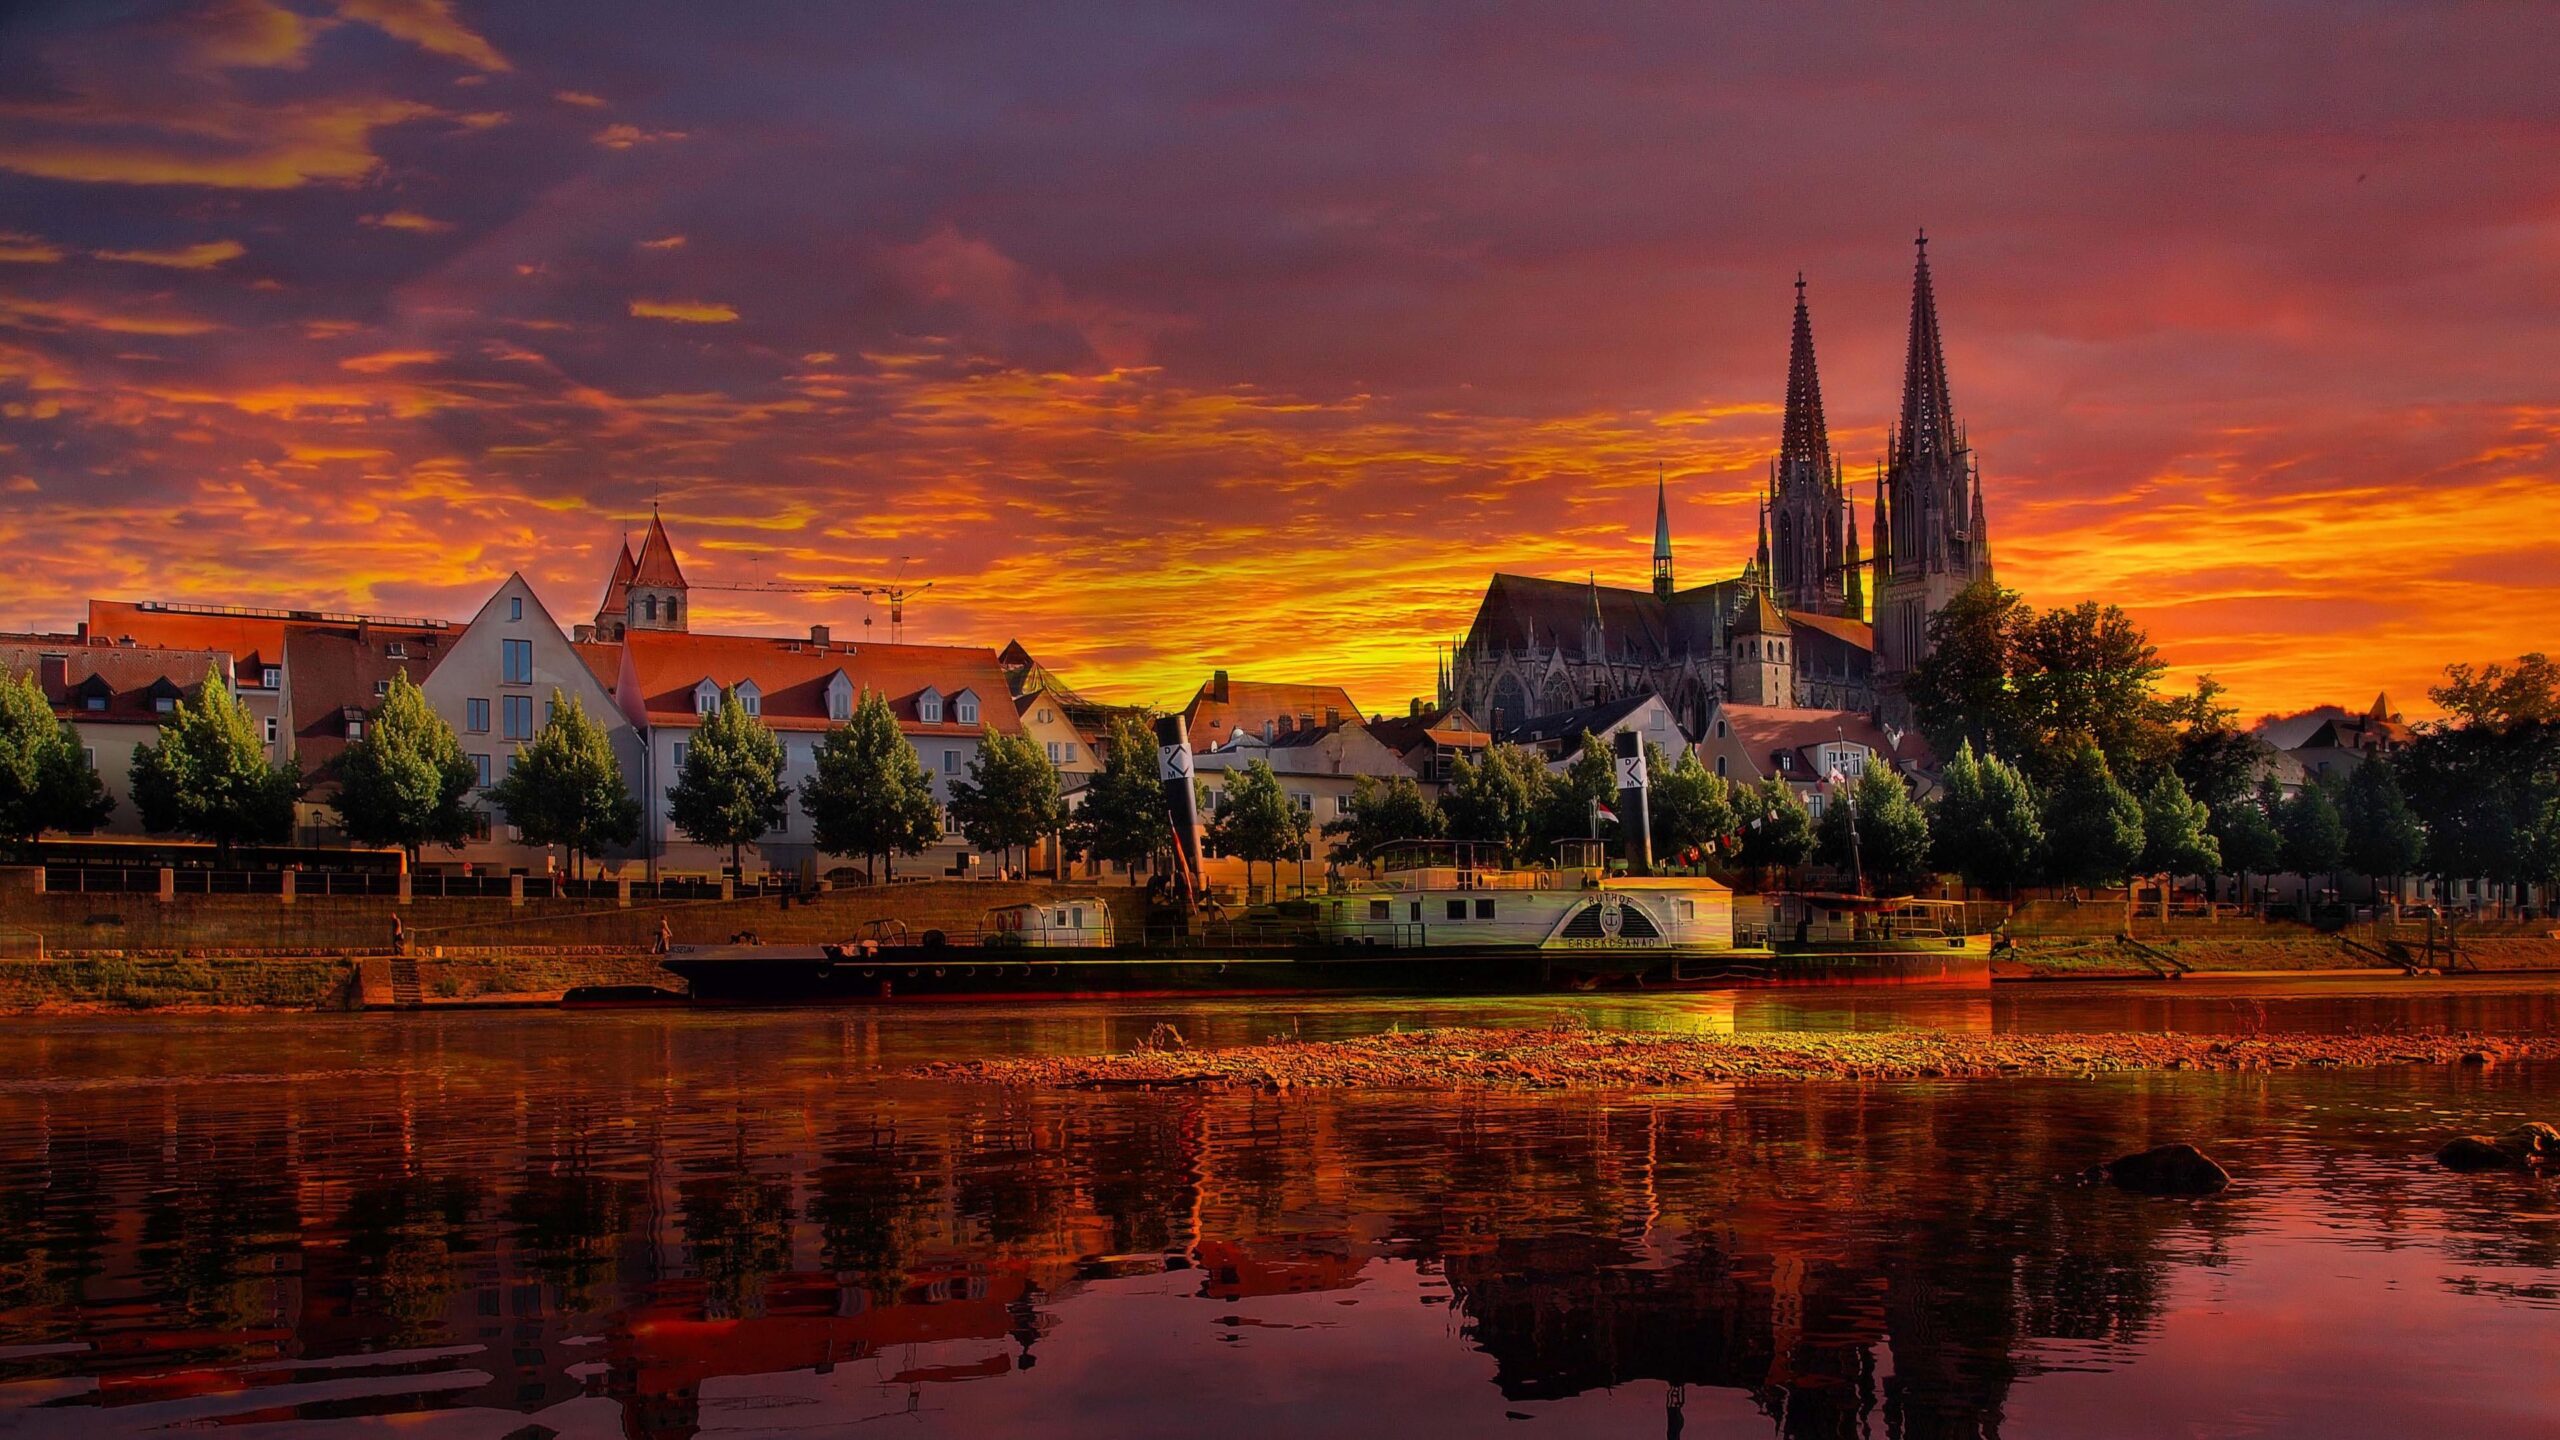 Download wallpapers regensburg, germany, sunset, cityscape